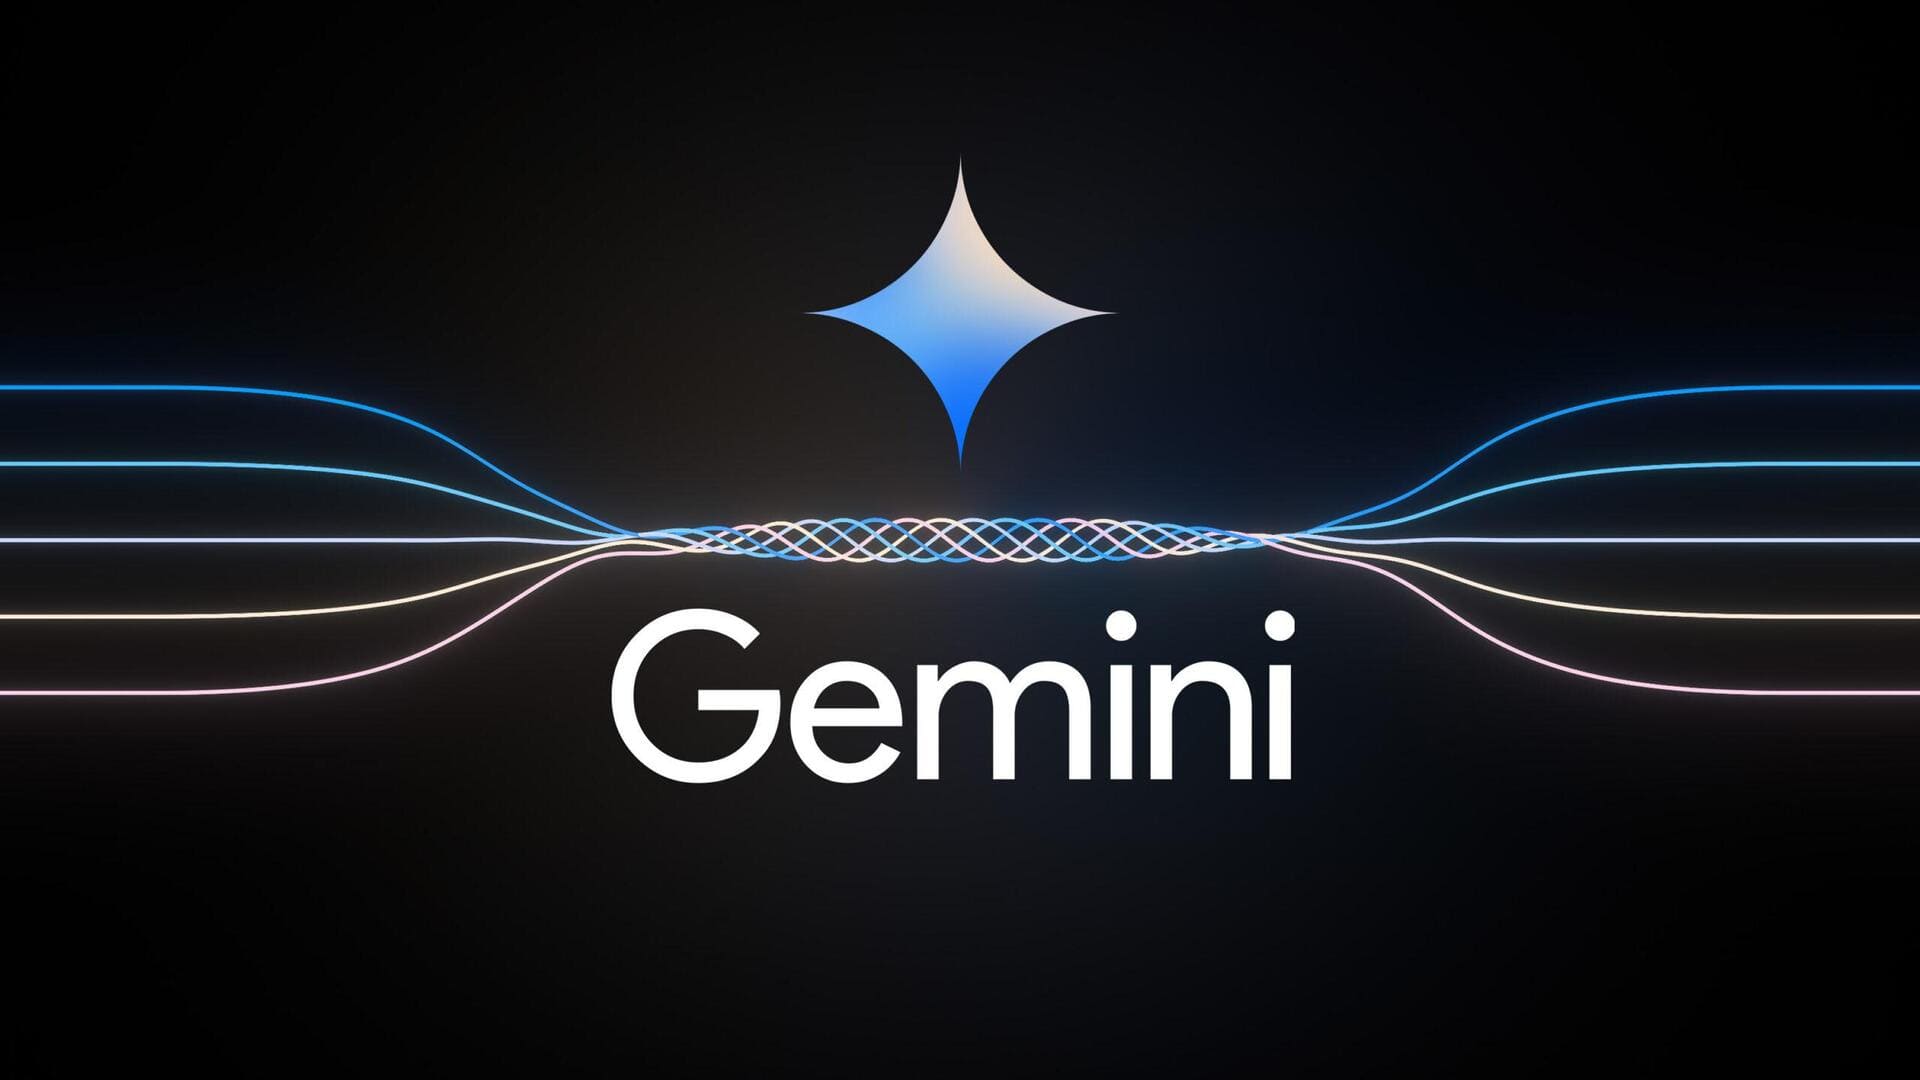 Google's Gemini retains even deleted conversations for up to 3-years